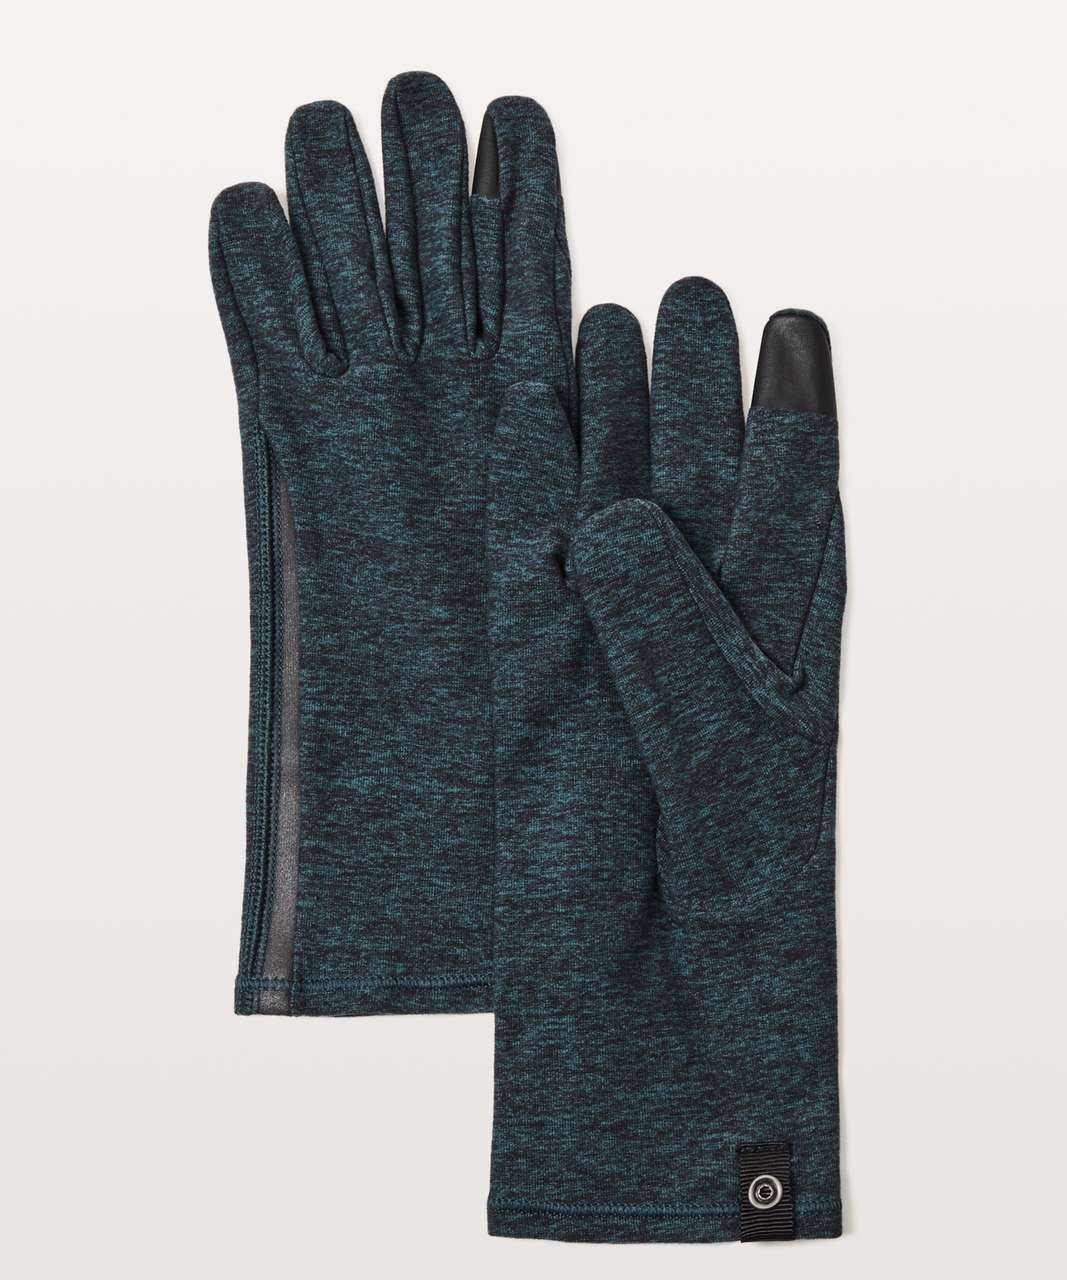 Lululemon Run It Out Gloves - Heathered Nocturnal Teal / Black